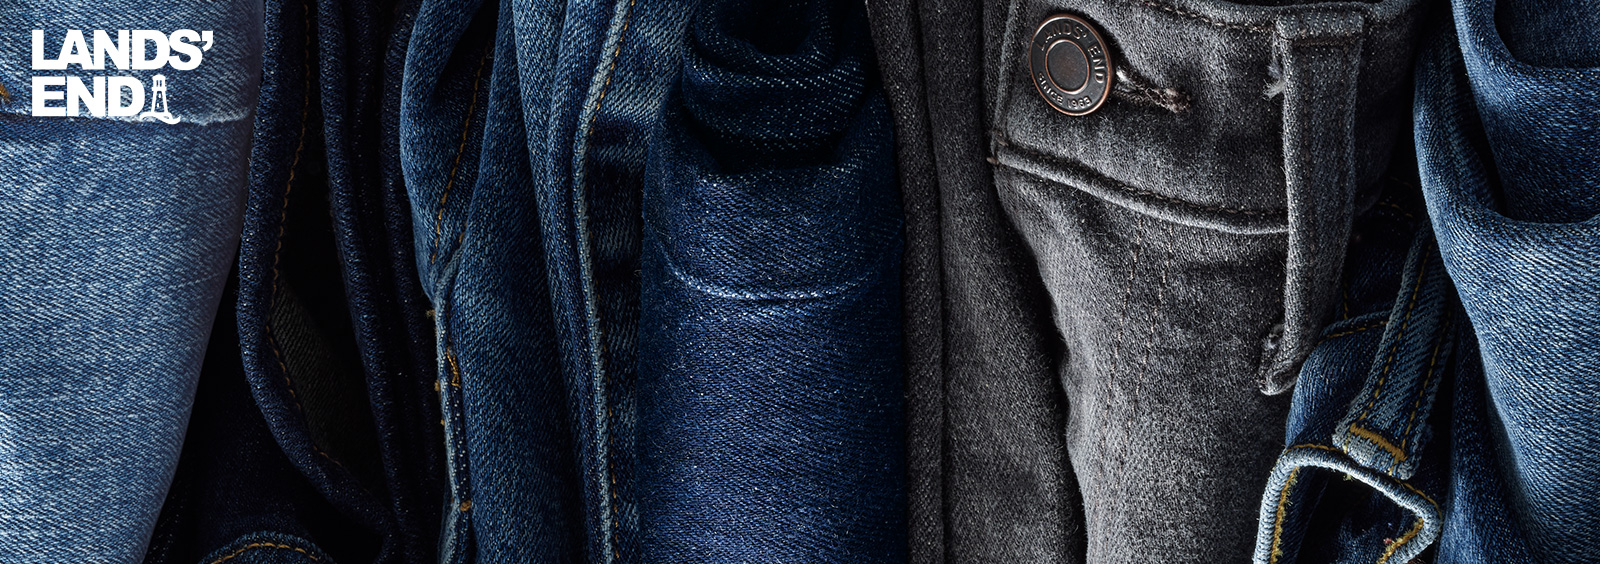 How to Dress Up Men’s Jeans in the Fall?